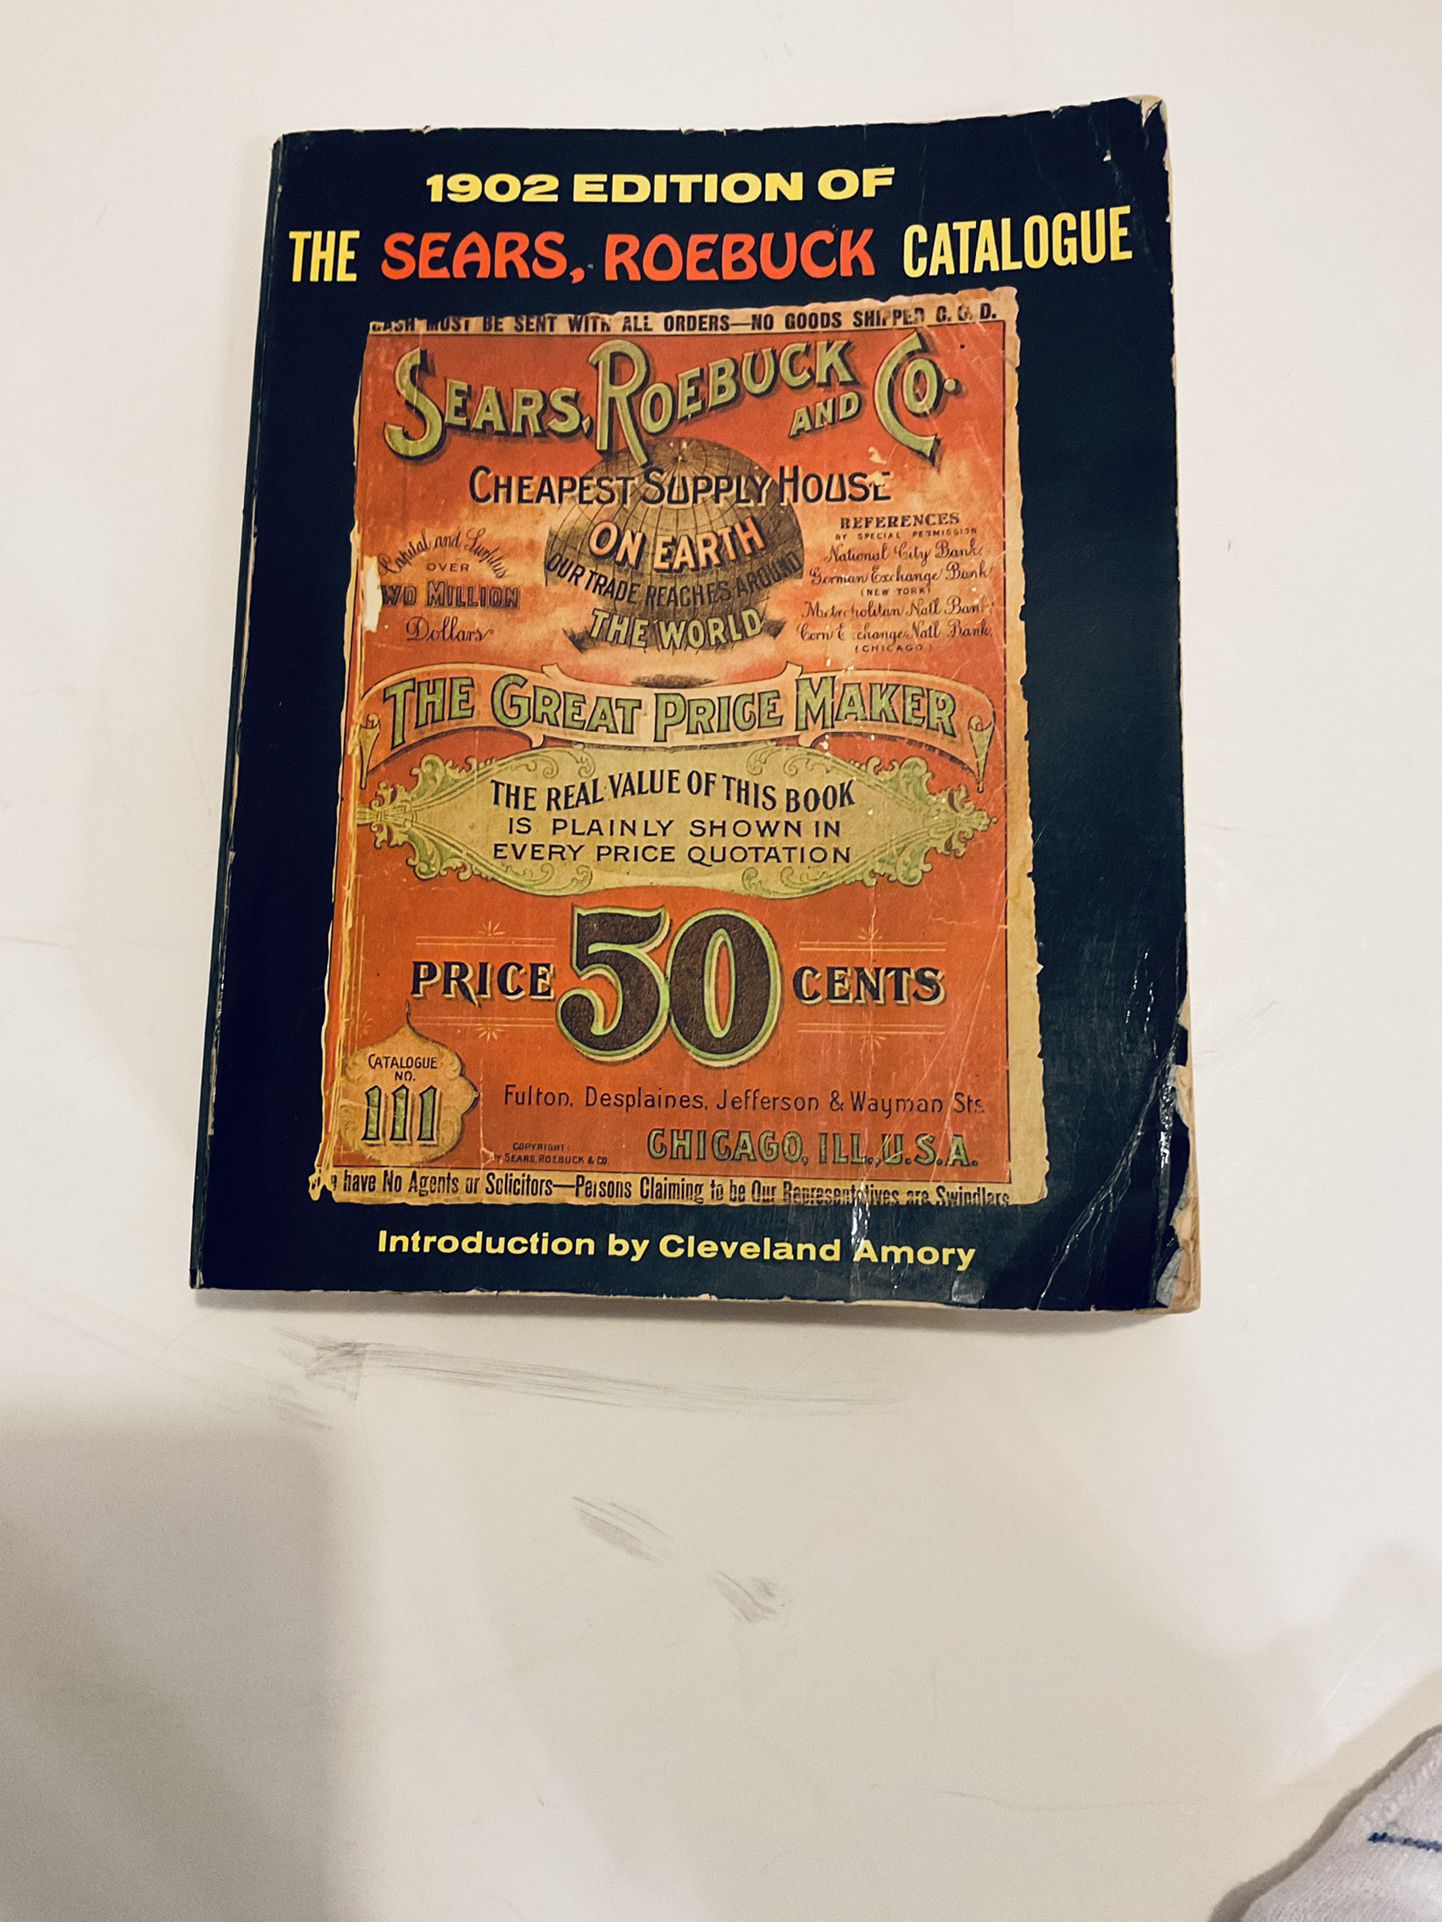 1969 REPRO OF A 1902 SEARS,  ROEBUCK CATALOG./OVER 1100 PAGES OF FASCINATING ITEMS & PRICES